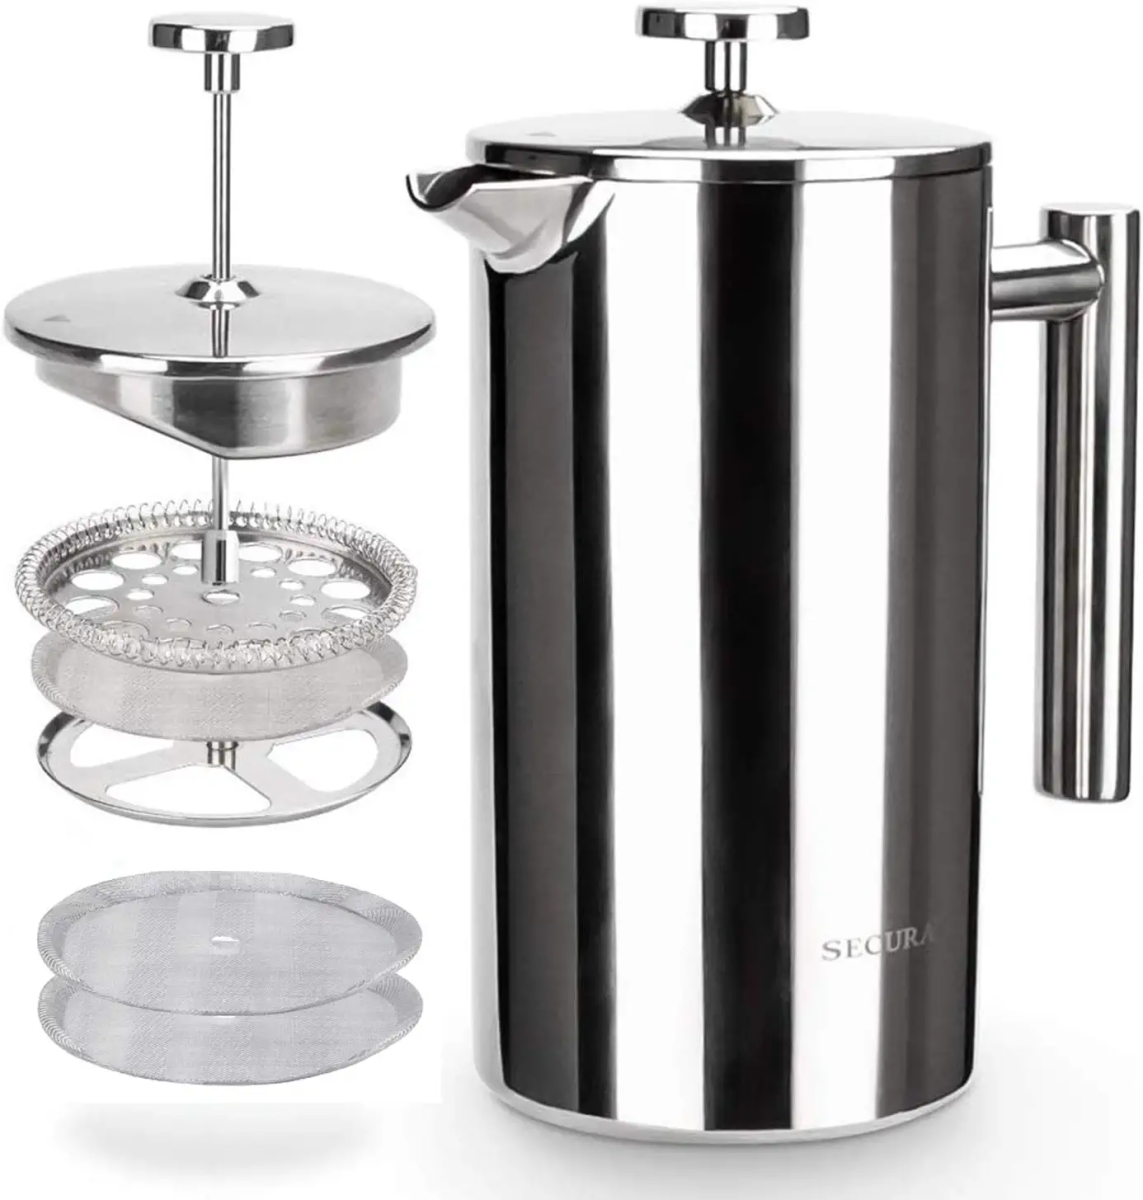 https://images.saymedia-content.com/.image/t_share/MjAxNTM3NDI5NTI4NjUxMzg1/the-3-best-stainless-steel-french-presses.png